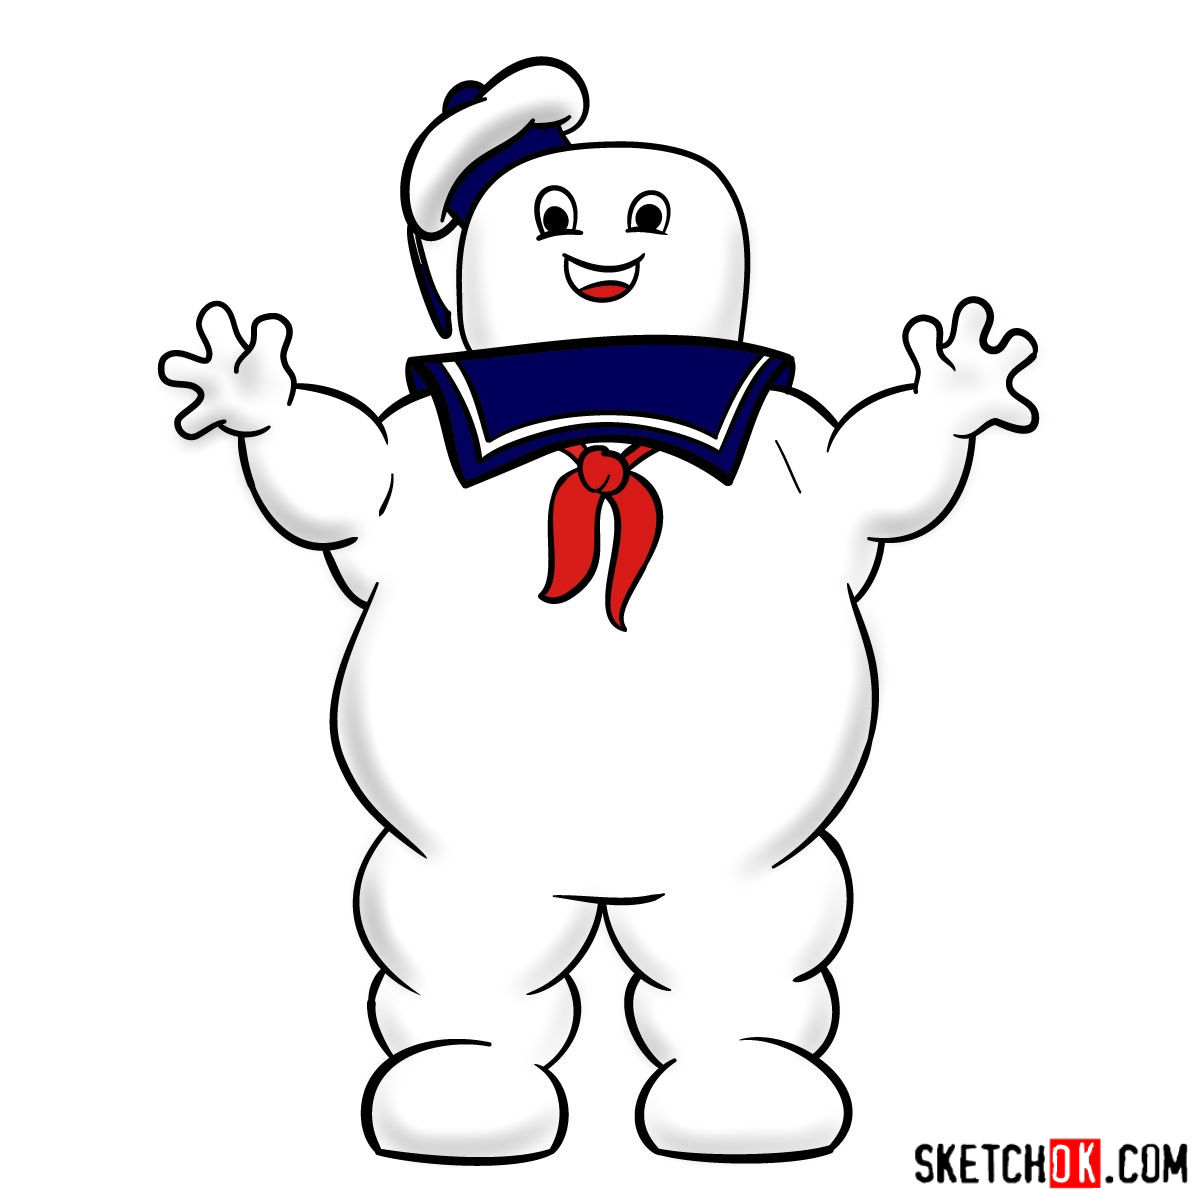 How To Draw Stay Puft Marshmallow Man Ghostbusters Step By